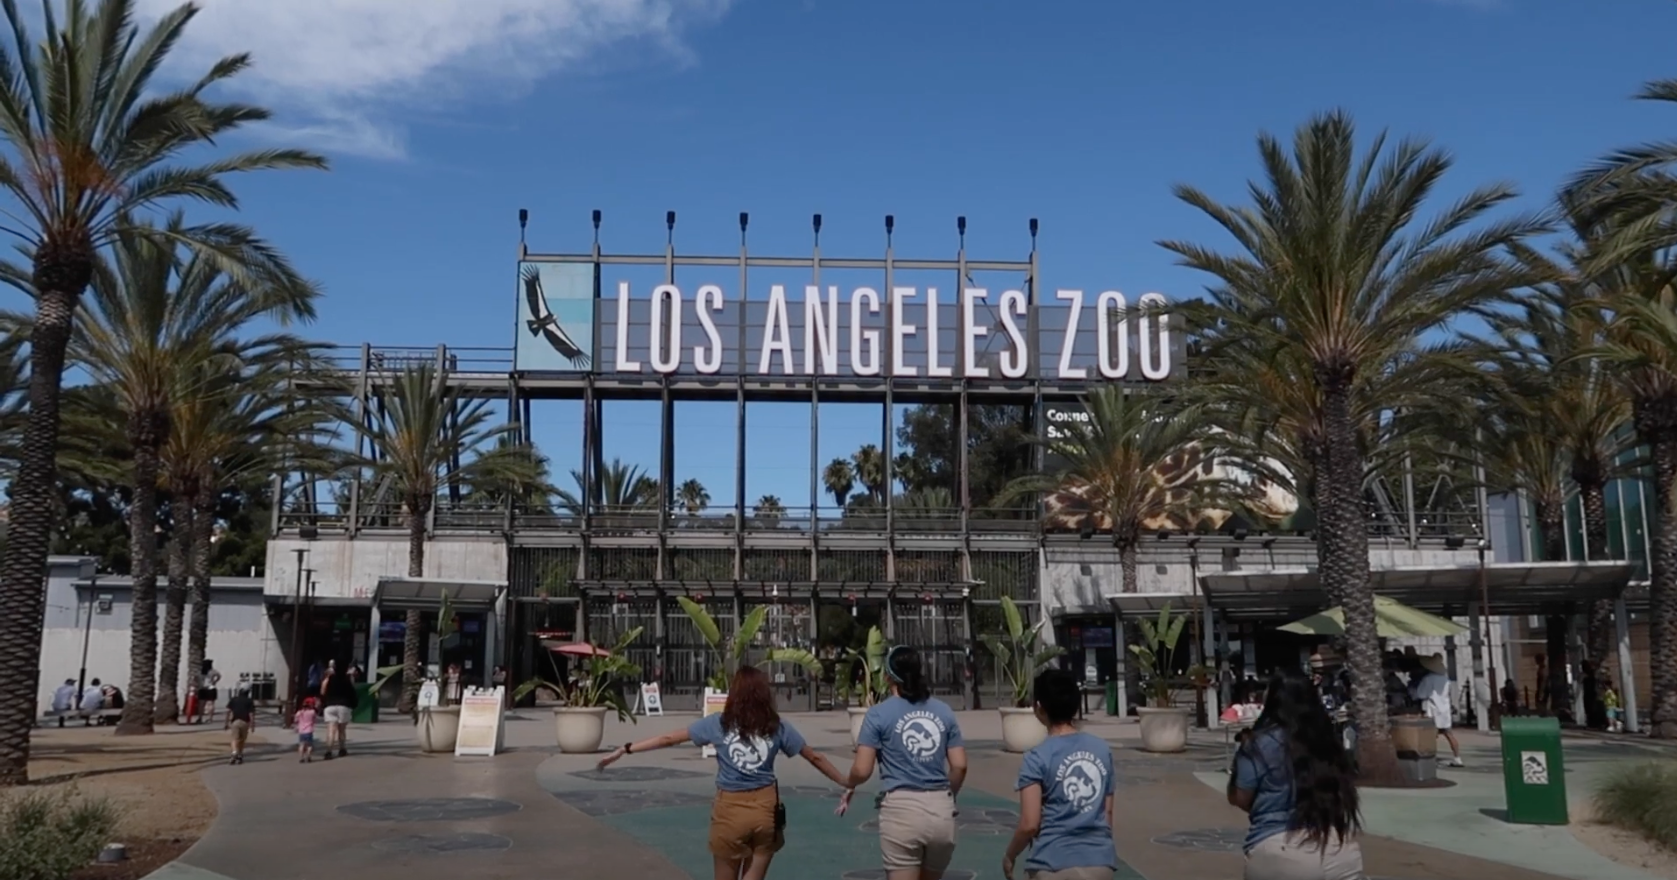 four interns, their back turned towards the camera, walk toward a park entrance with large signage that reads " Los Angeles Zoo" surrounded by several trees